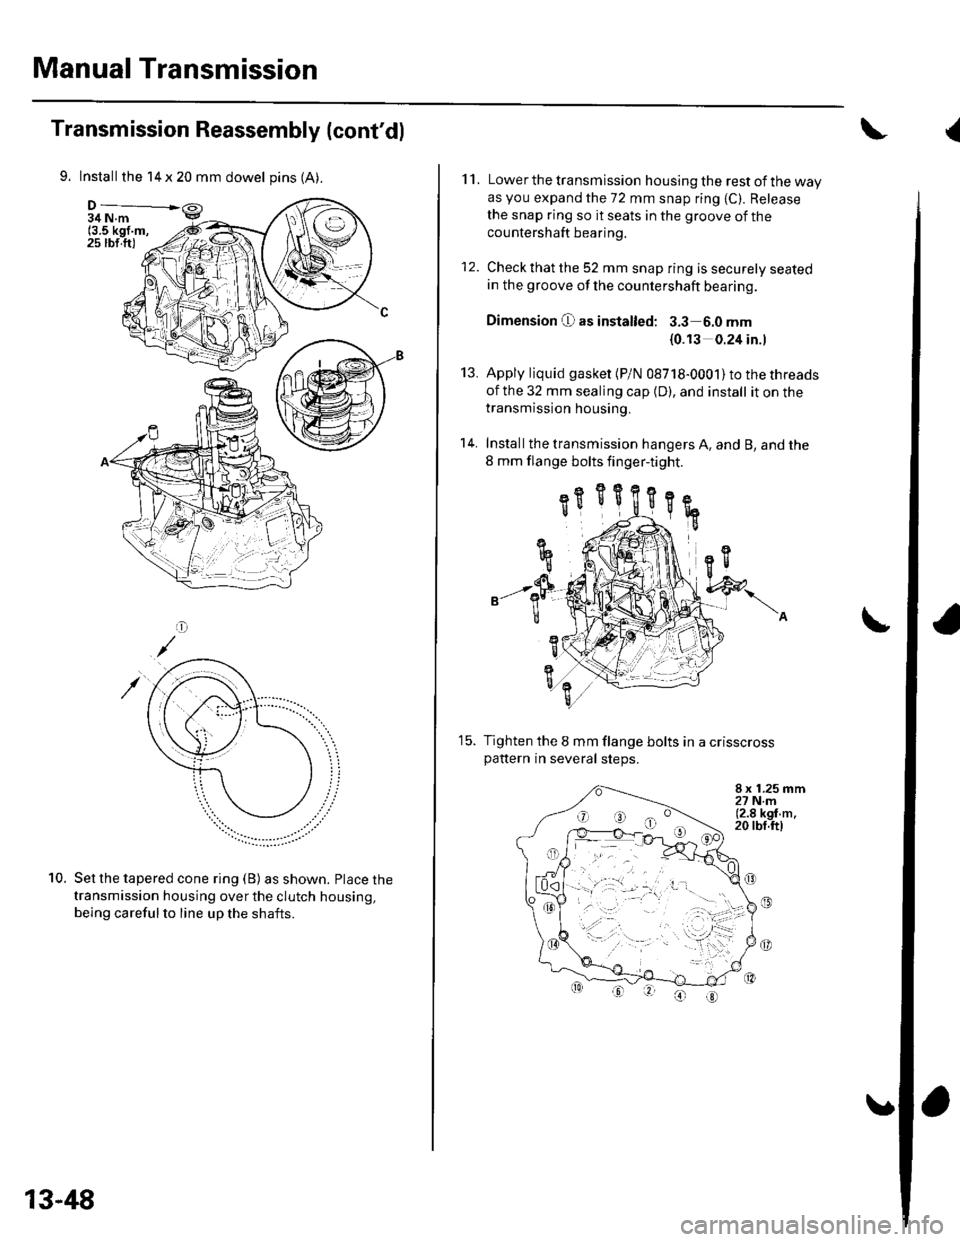 HONDA CIVIC 2002 7.G Workshop Manual Manual Transmission
Transmission Reassembly (contdl
9. Install the 14 x 20 mm dowel pins (A).
34 N.m(3.5 kgf.m,25 rbf.ft)
Set the tapered cone ring (B) as shown. Place the
transmission housing over t